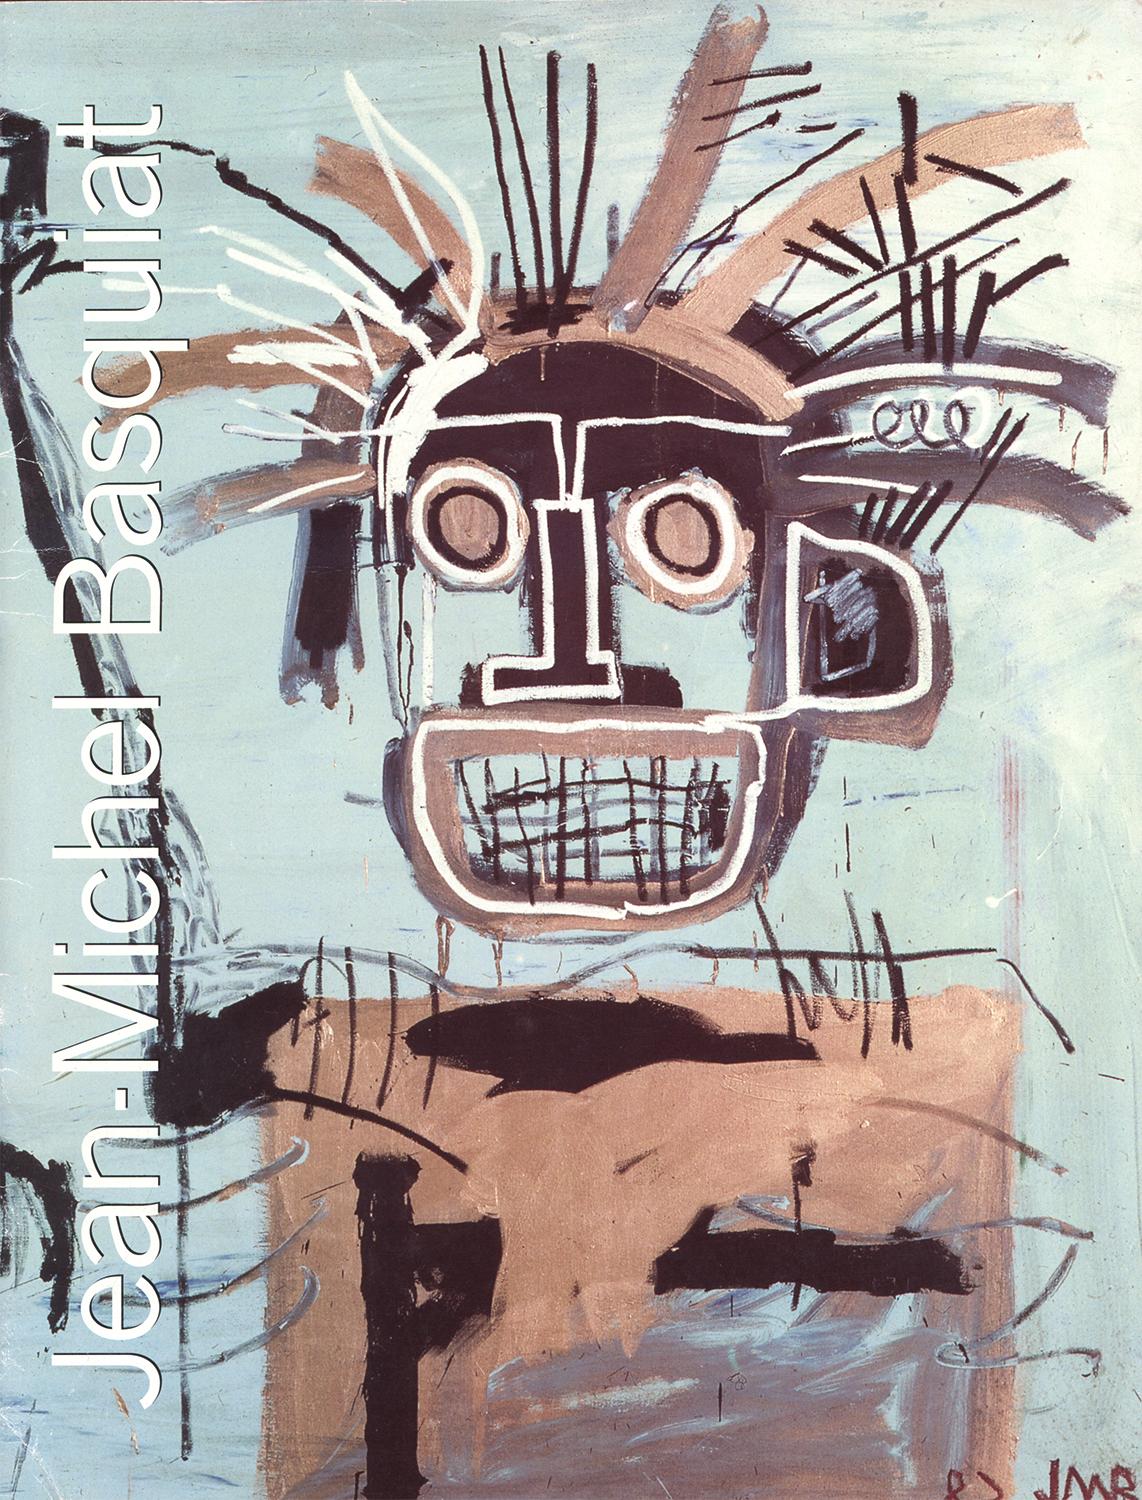 Basquiat Serpentine Gallery London 1996:
A rare, highly collectable 1990's Basquiat exhibition catalog published on the occasion of Basquiat's first major London exhibition: Jean-Michel Basquiat, Serpentine Gallery, London (6 March - 21 April